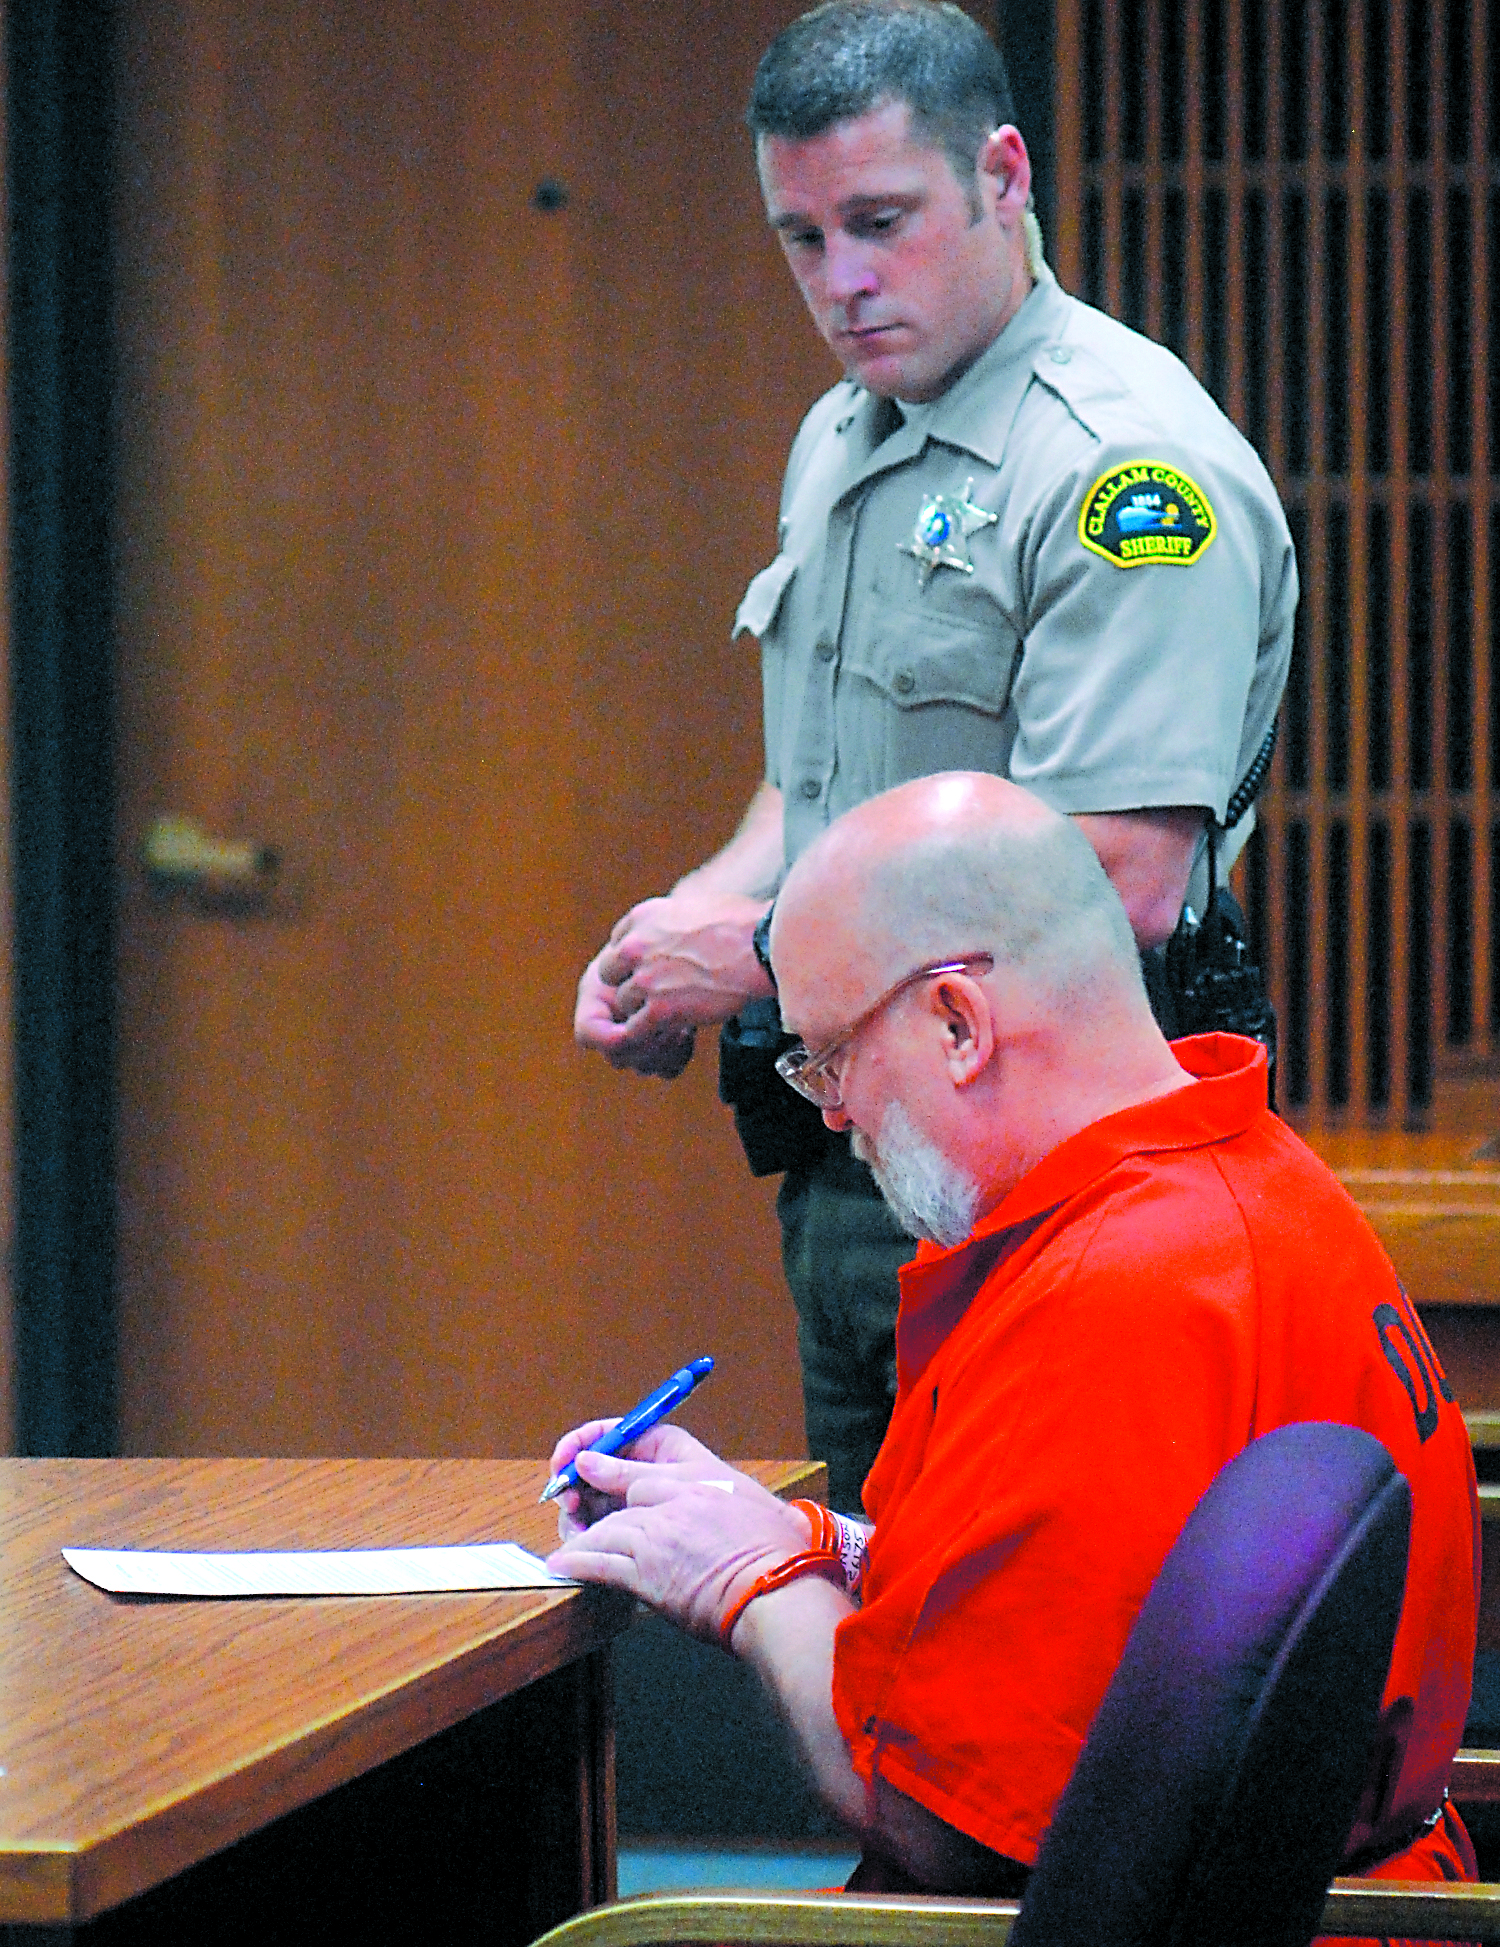 Darold Stenson signs court papers during last Friday's status hearing in Clallam County Superior Court. Standing watch is court sercurity officer Eric Morris. Keith Thorpe/Peninsula Daily News